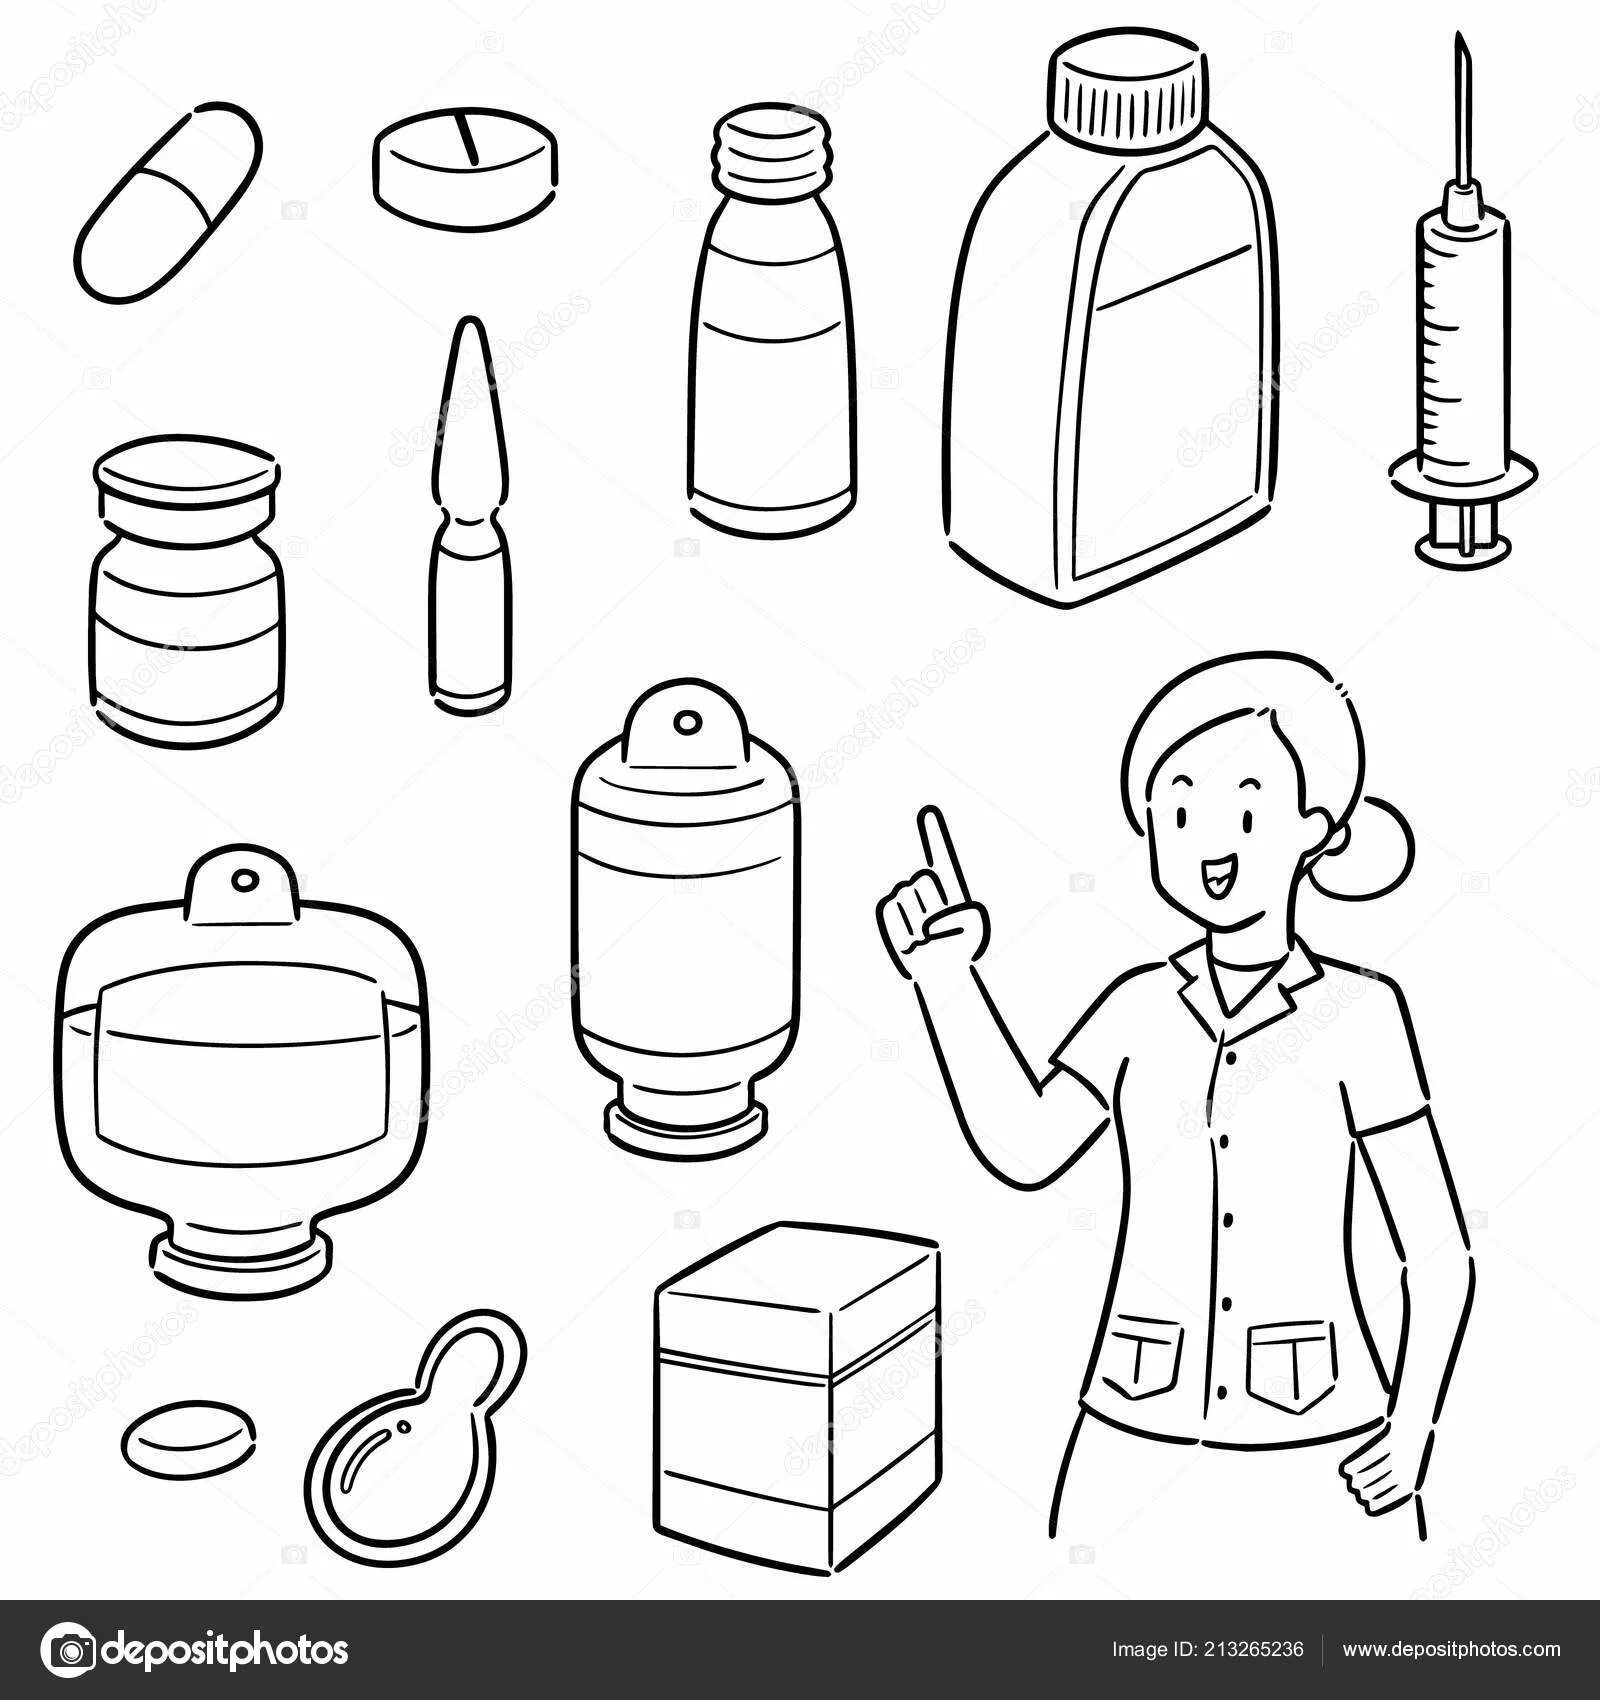 Pharmacist coloring page